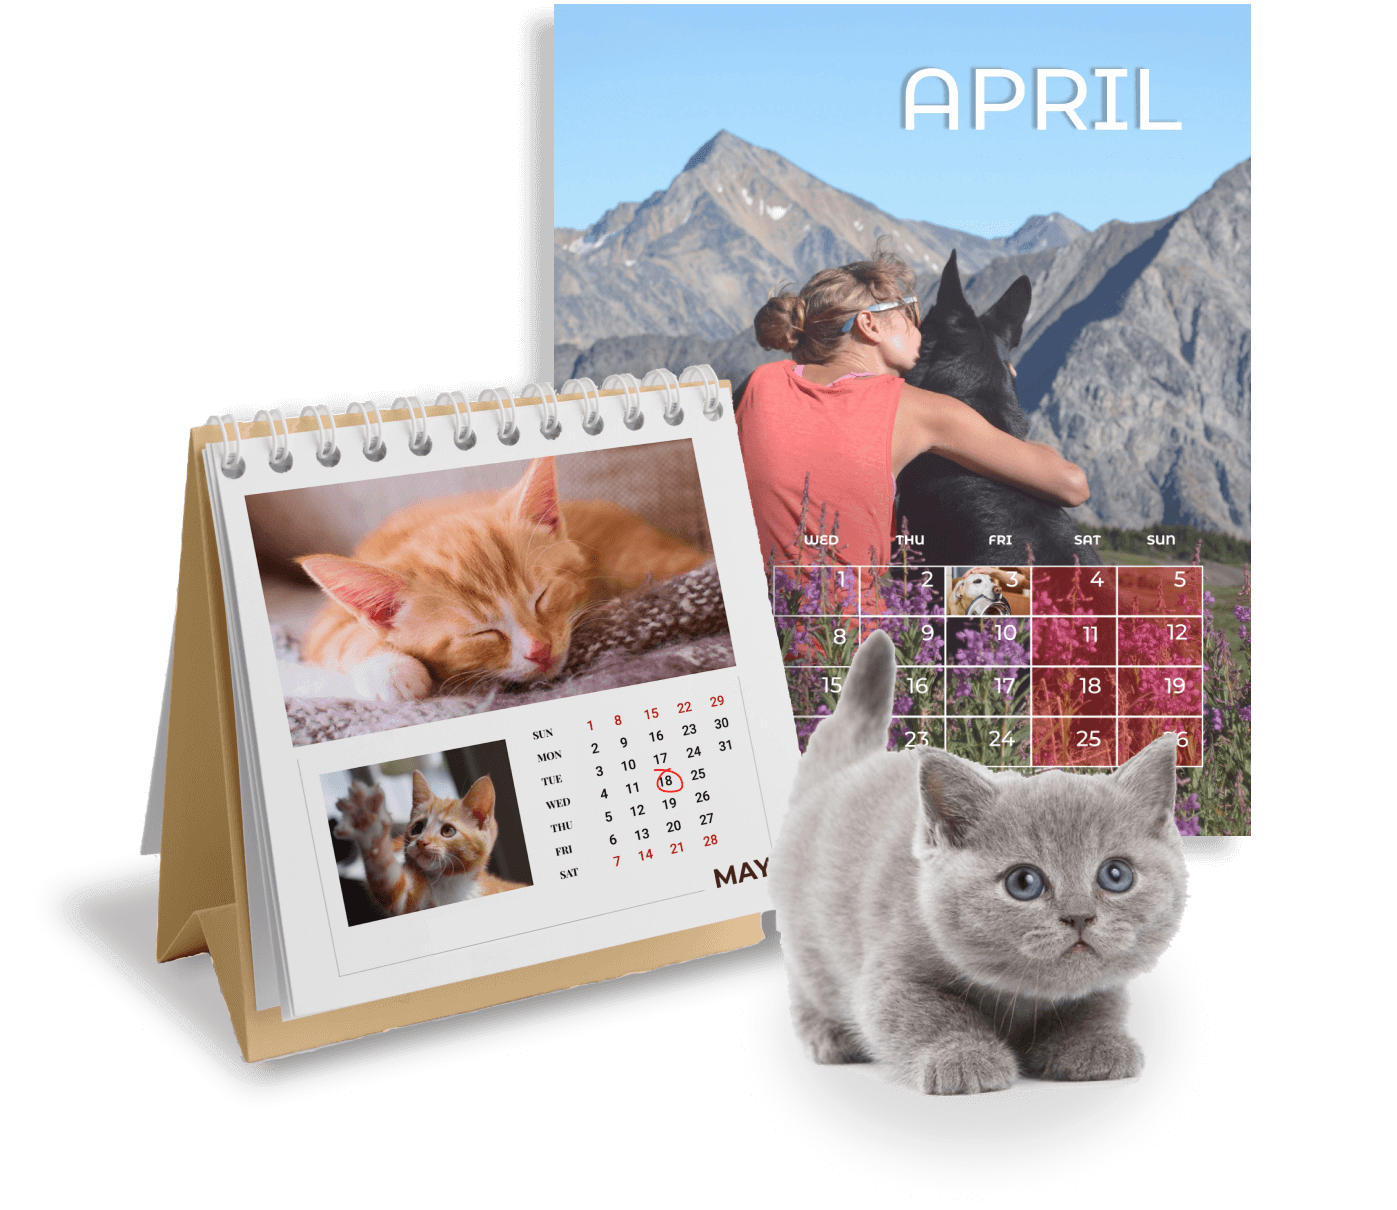 Want to design your own desk calendar?